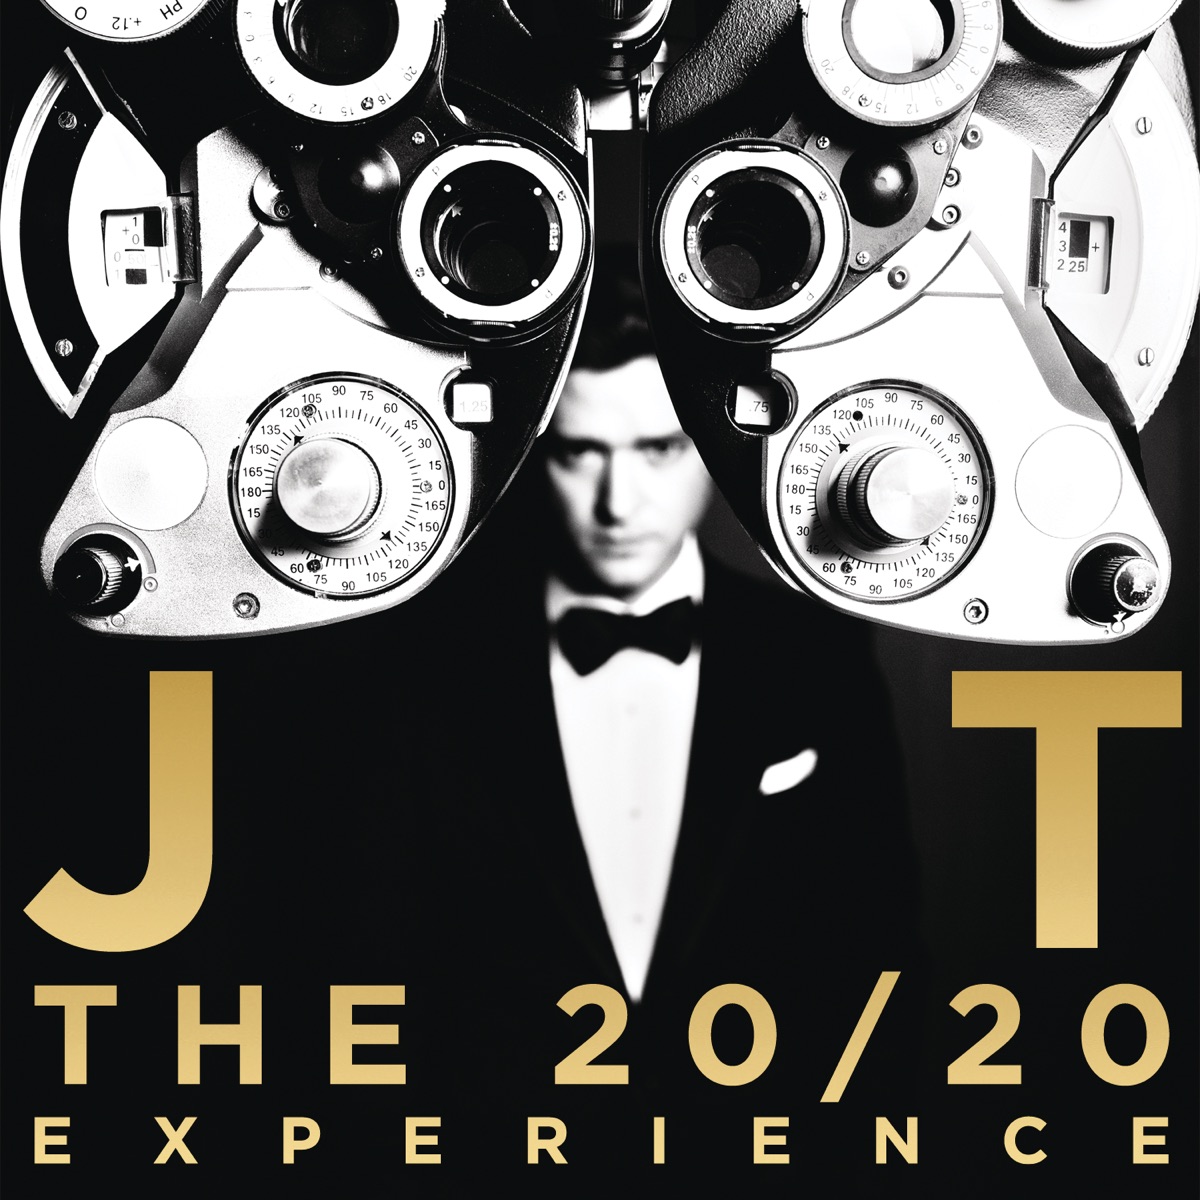 Justin Timberlake - The 20/20 Experience (Deluxe Version)